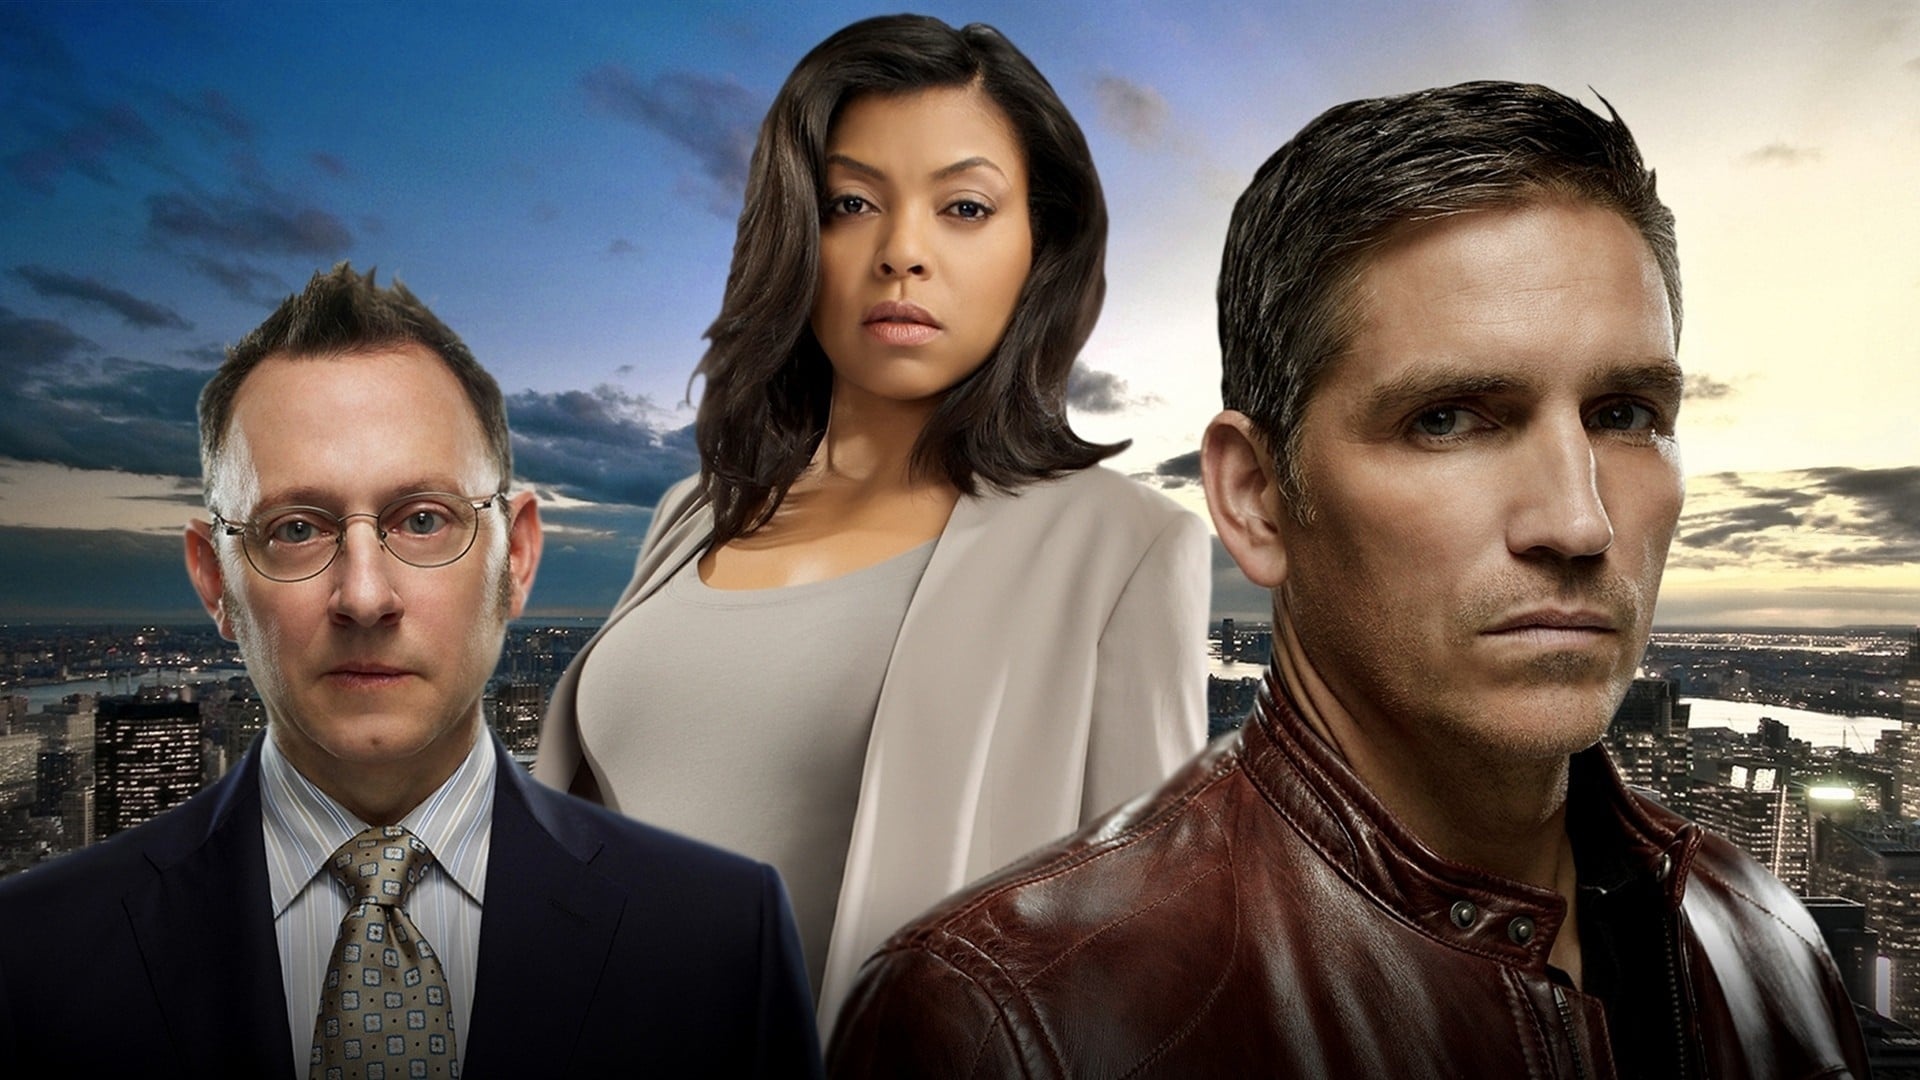 Person of Interest, Gripping TV series, Character-driven storytelling, Tense and suspenseful, 1920x1080 Full HD Desktop